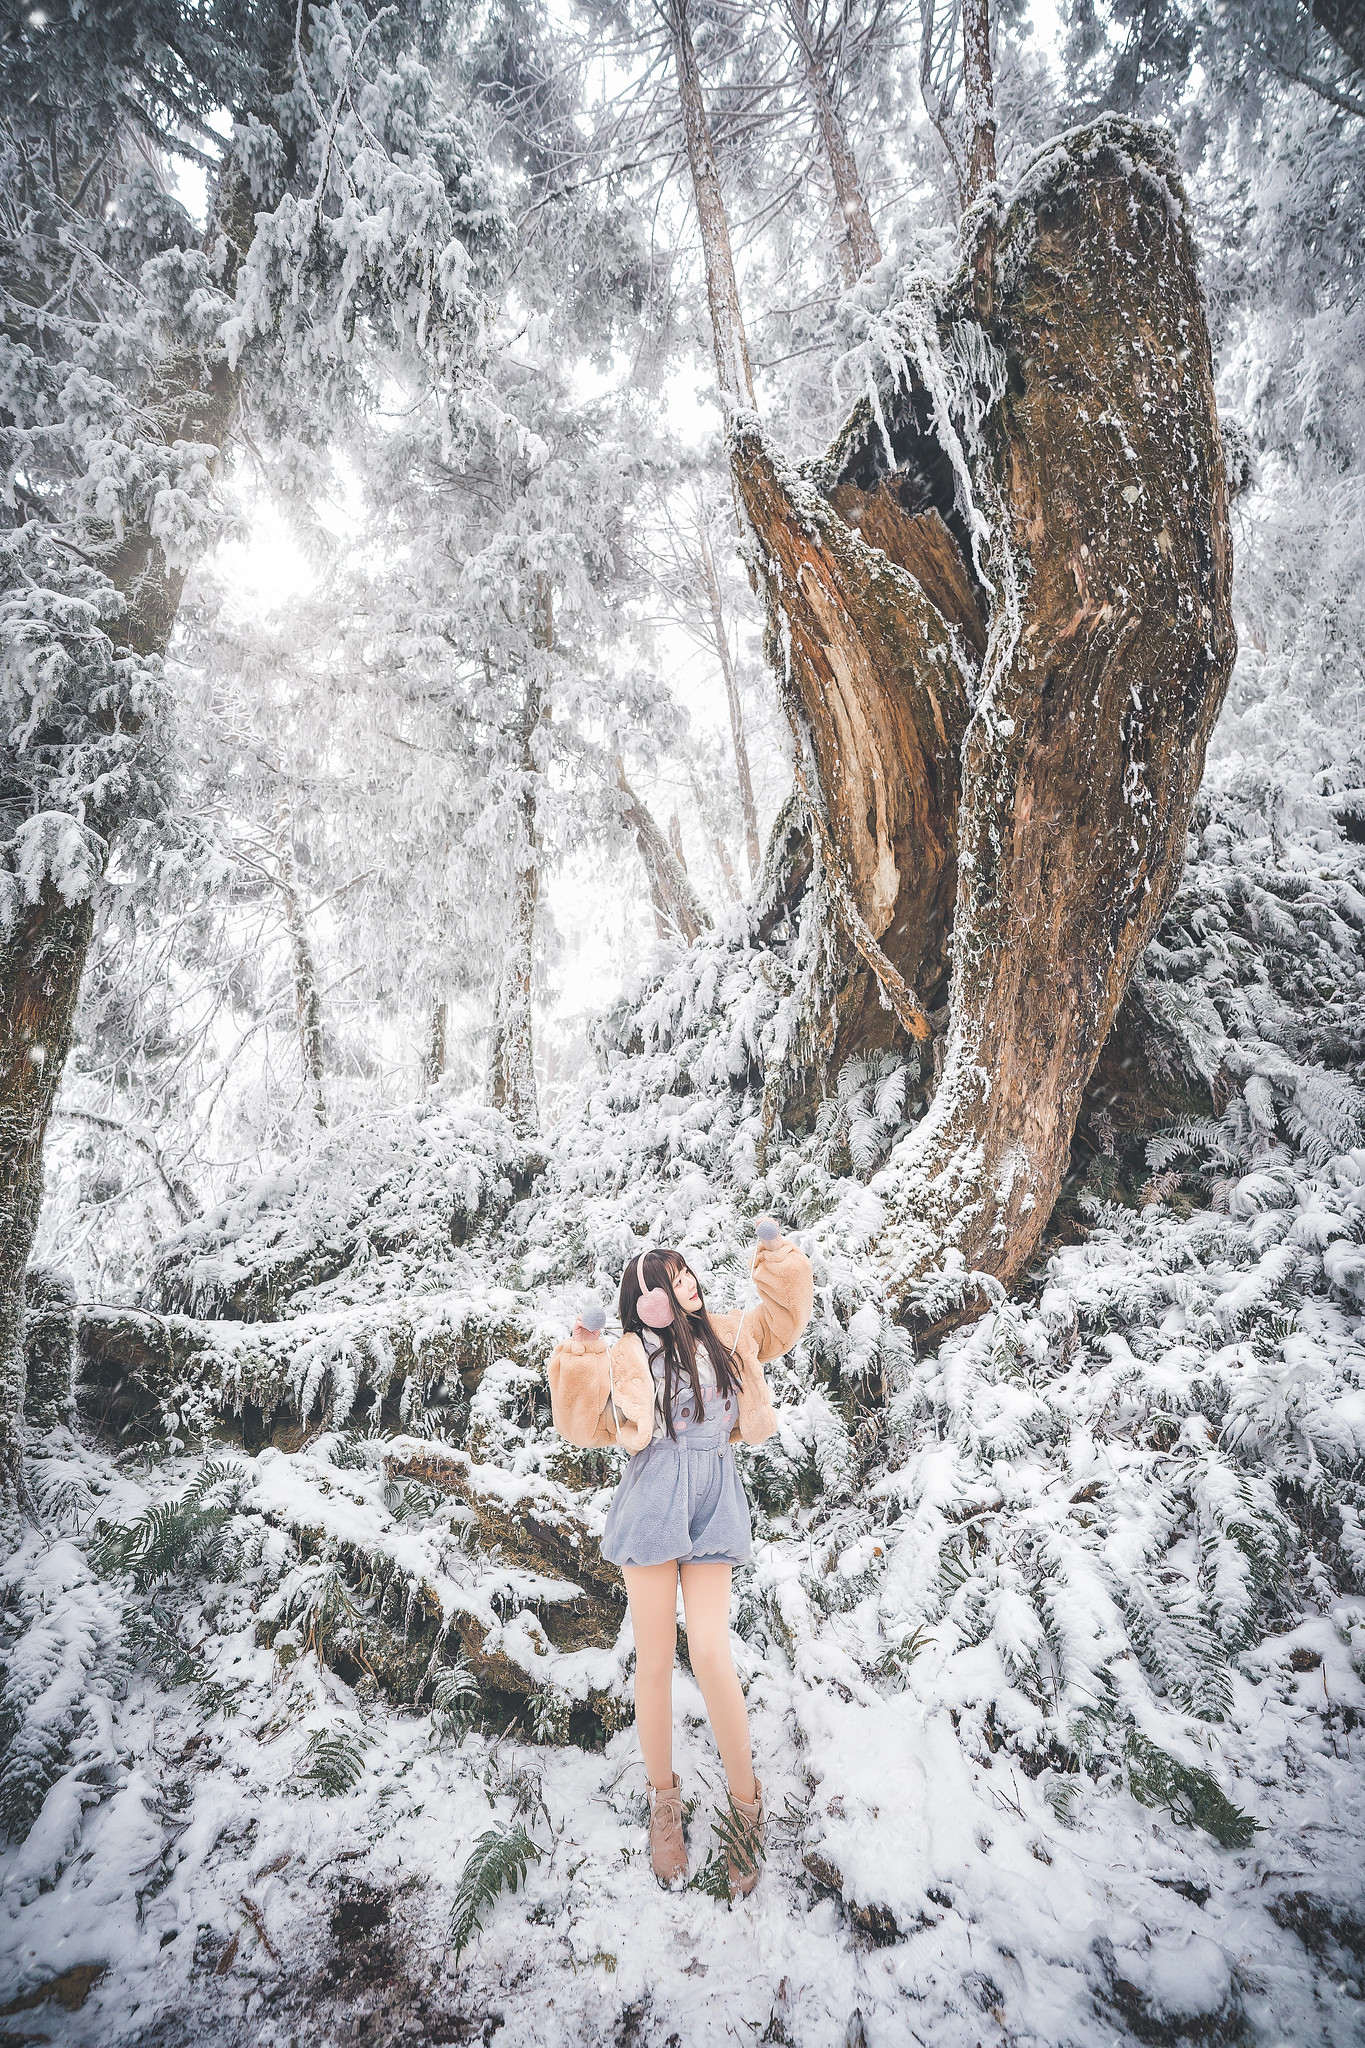 People 1365x2048 Asian women model outdoors women outdoors trees Asia plants cold winter snow standing